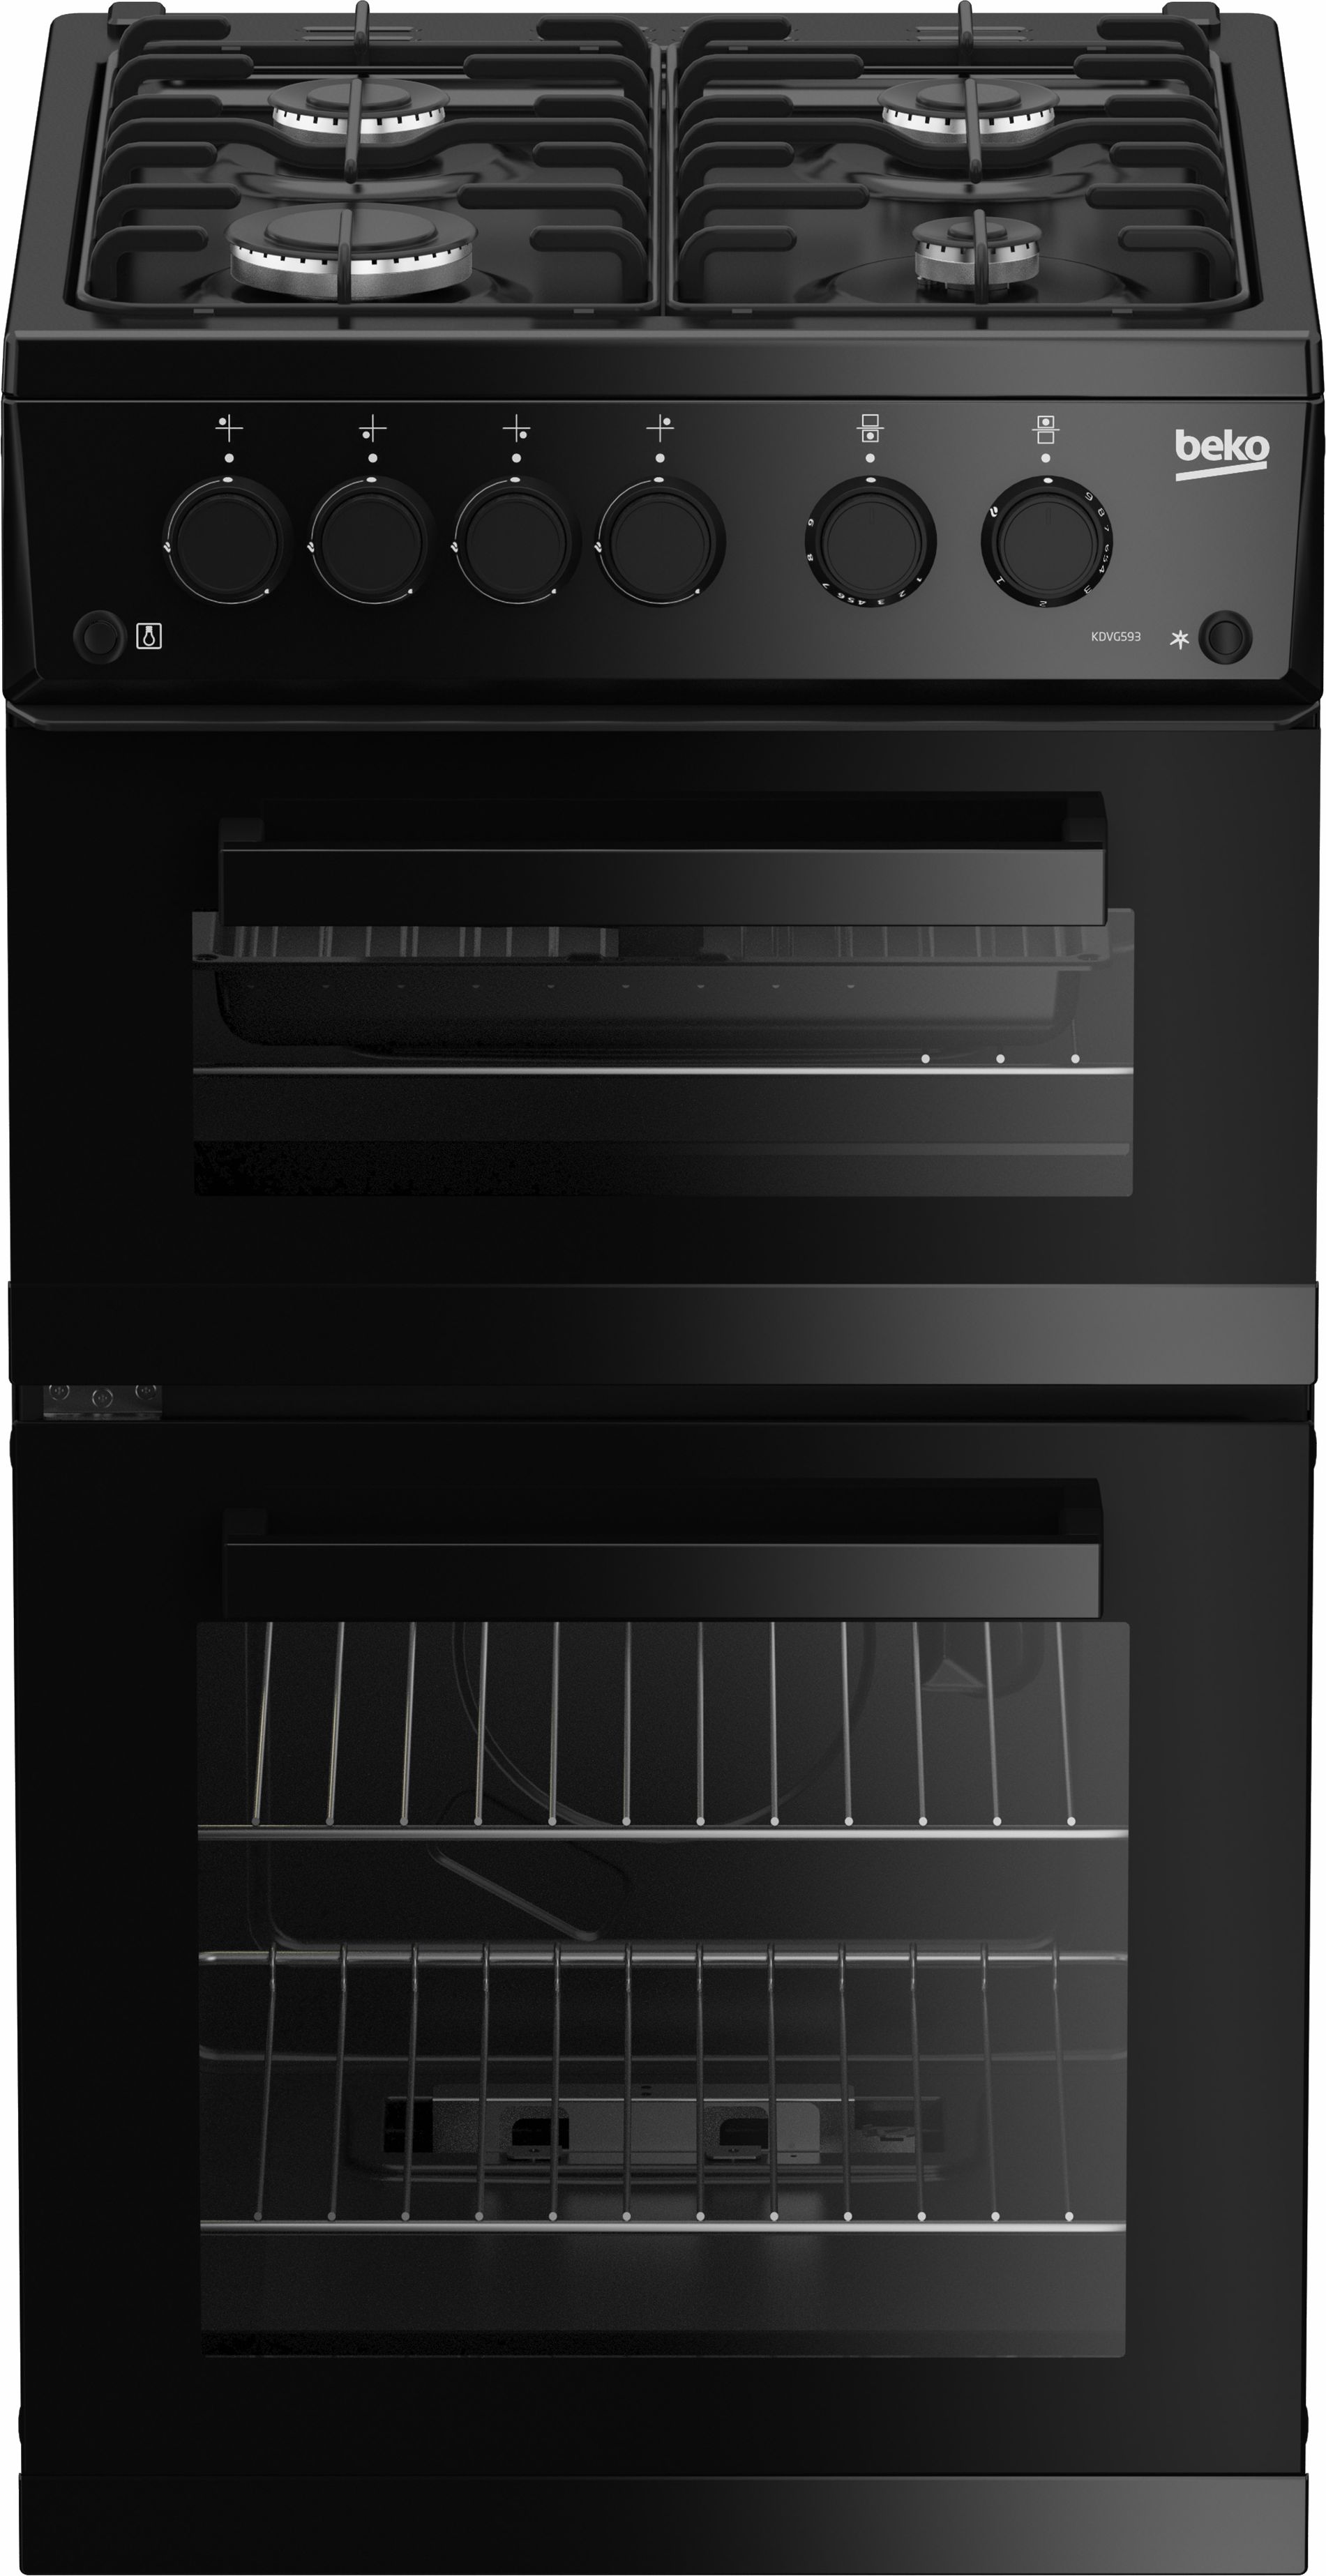 Beko KDVG593K Freestanding Gas Cooker with Gas Grill - Black - A+ Rated, Black